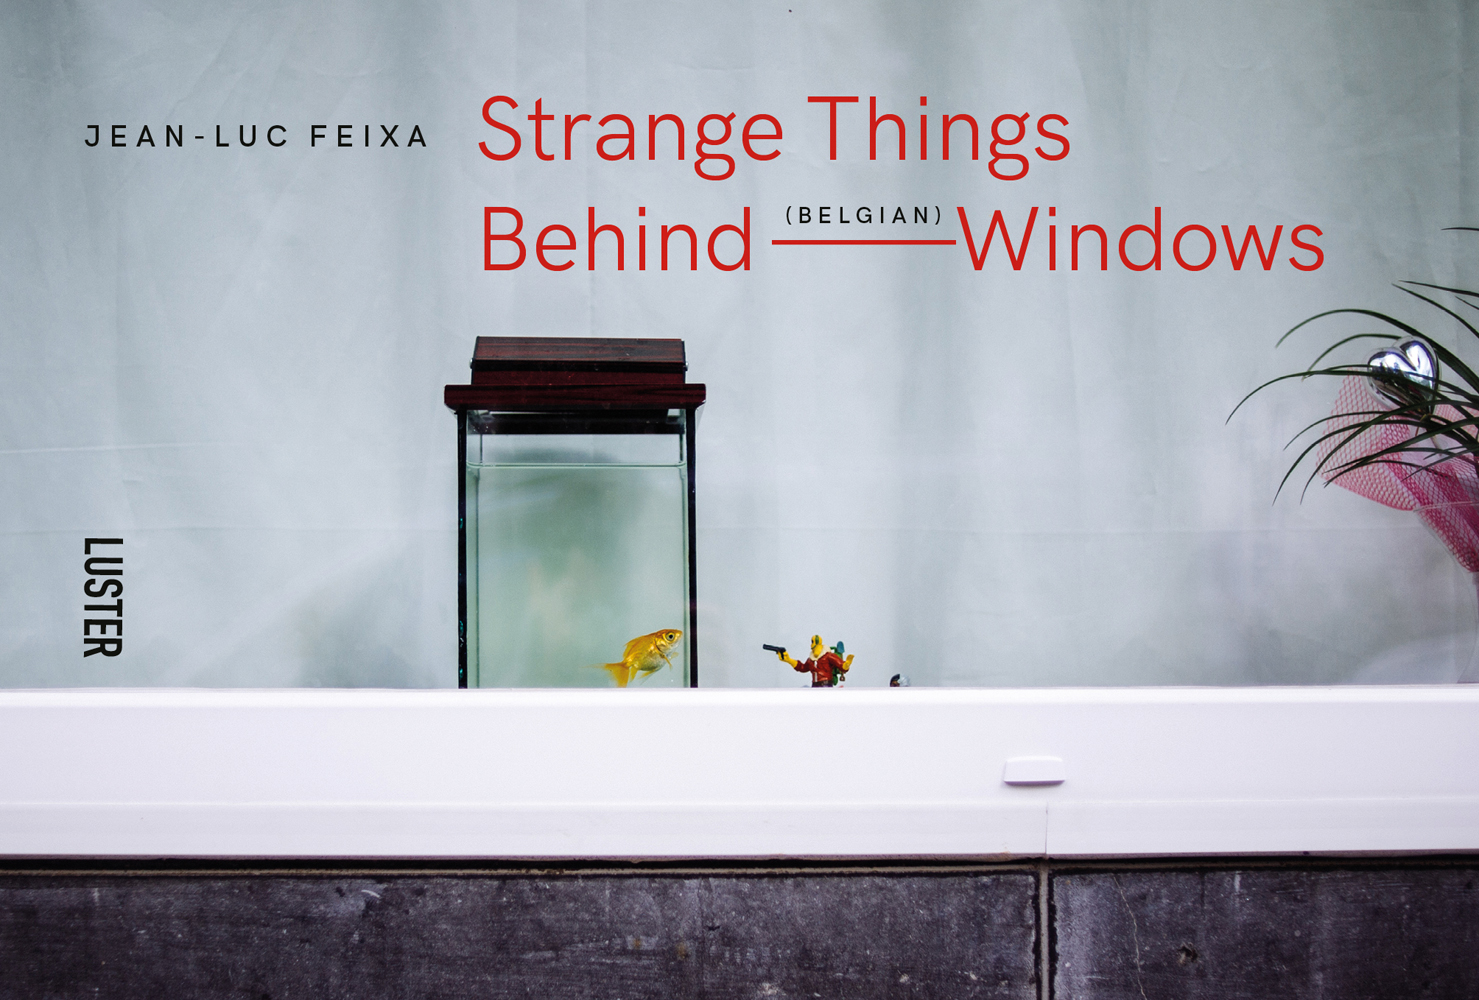 Small glass oblong fish tank with a goldfish, on windowsill, white curtain behind, Strange Things Behind Belgian Windows in orange and black font above.